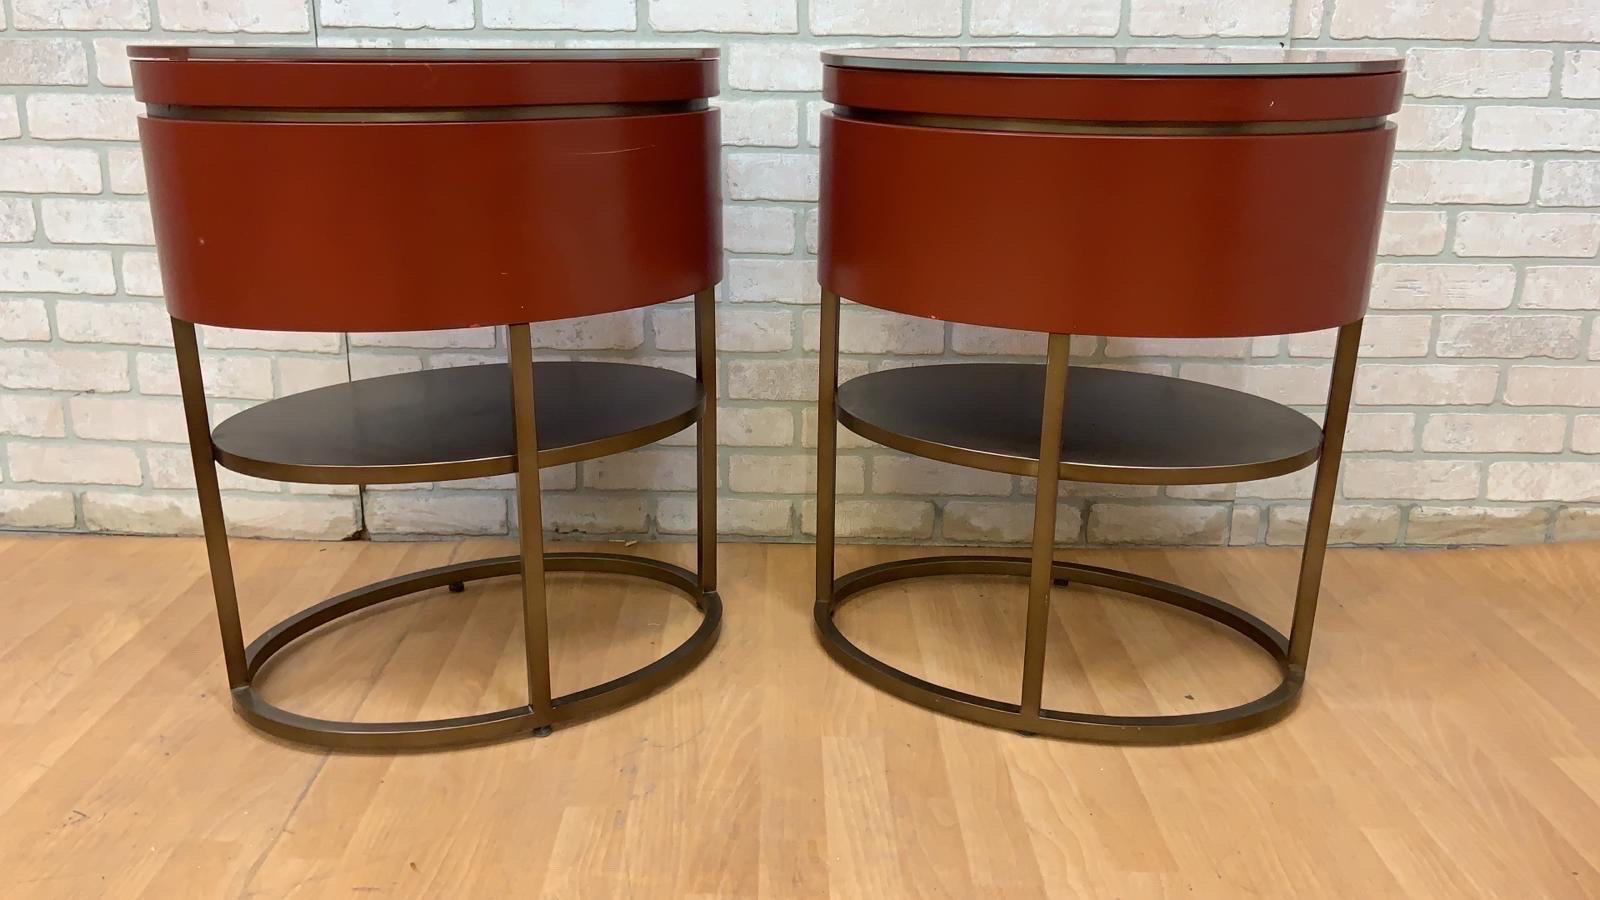 Vintage Contemporary Custom Designed Oval Beistelltisch/Night-Stands - Paar 

Vintage Custom Designer Contemporary Oval Deep Red Lacquered Wood with Brushed Brass Stand & Tinted Glass 2 Tier, Single Drawer Side-Tables. Wir haben sie vom James Hotel